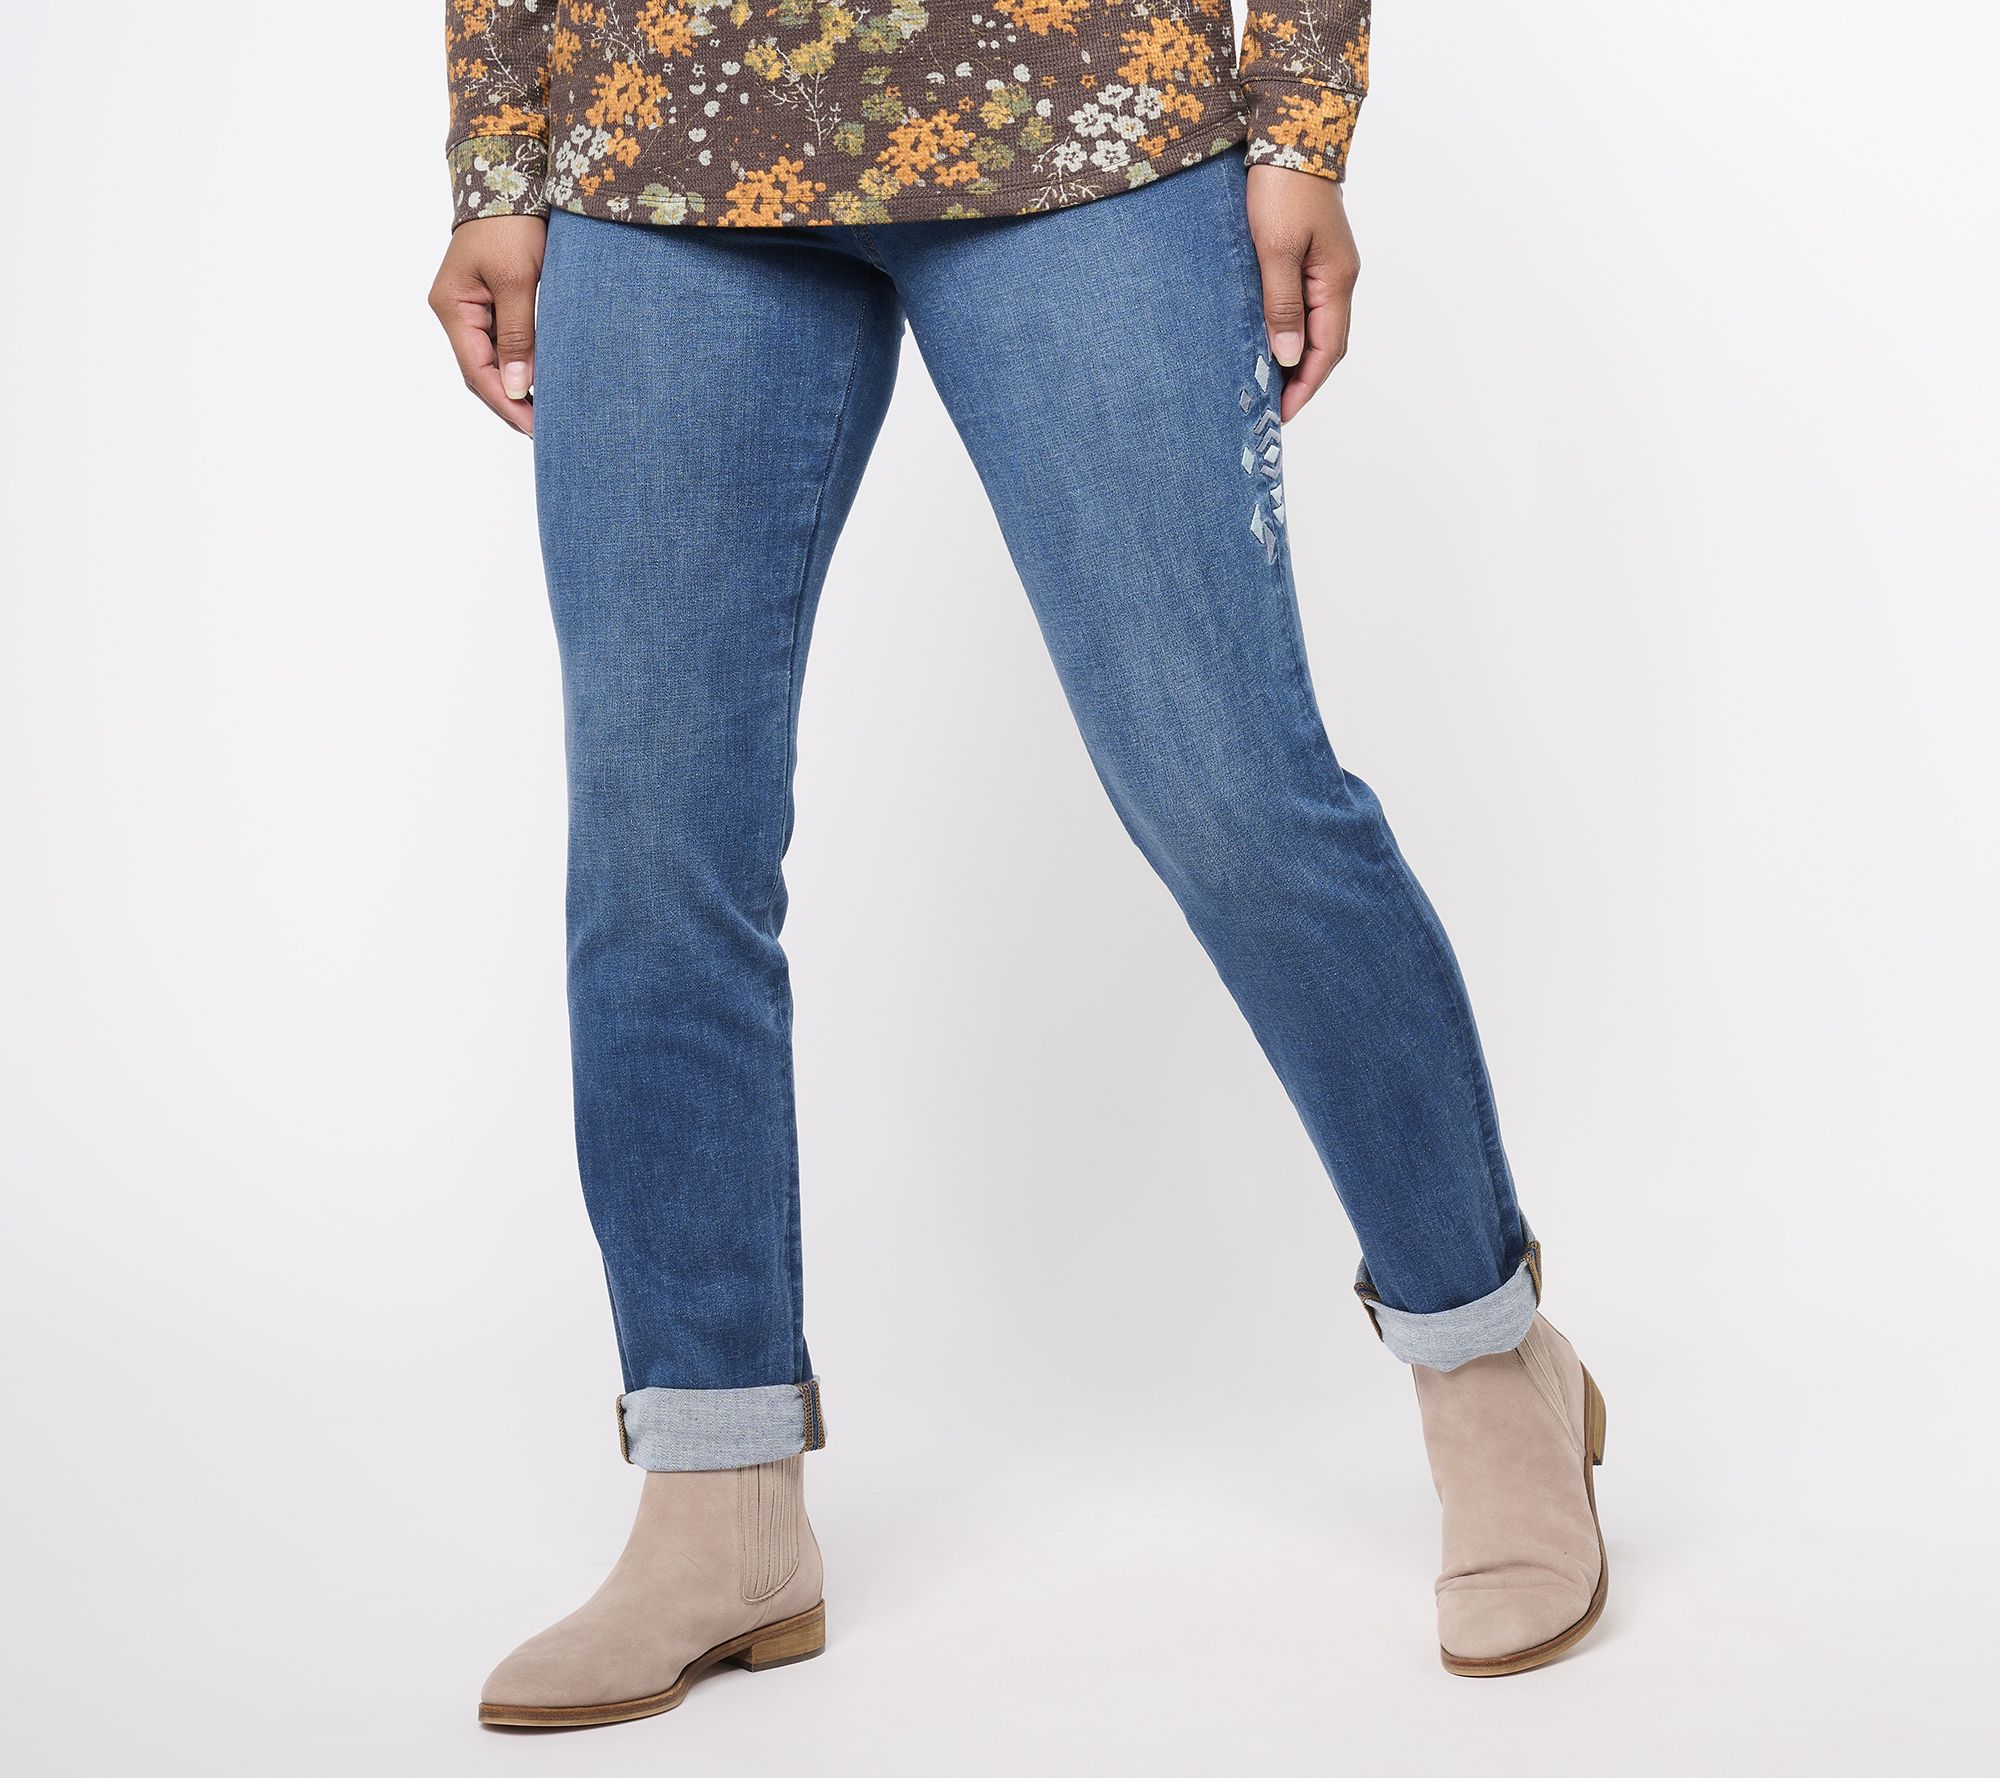 QVC Offers Adaptive Collection Through Its Private Label, Denim & Co.